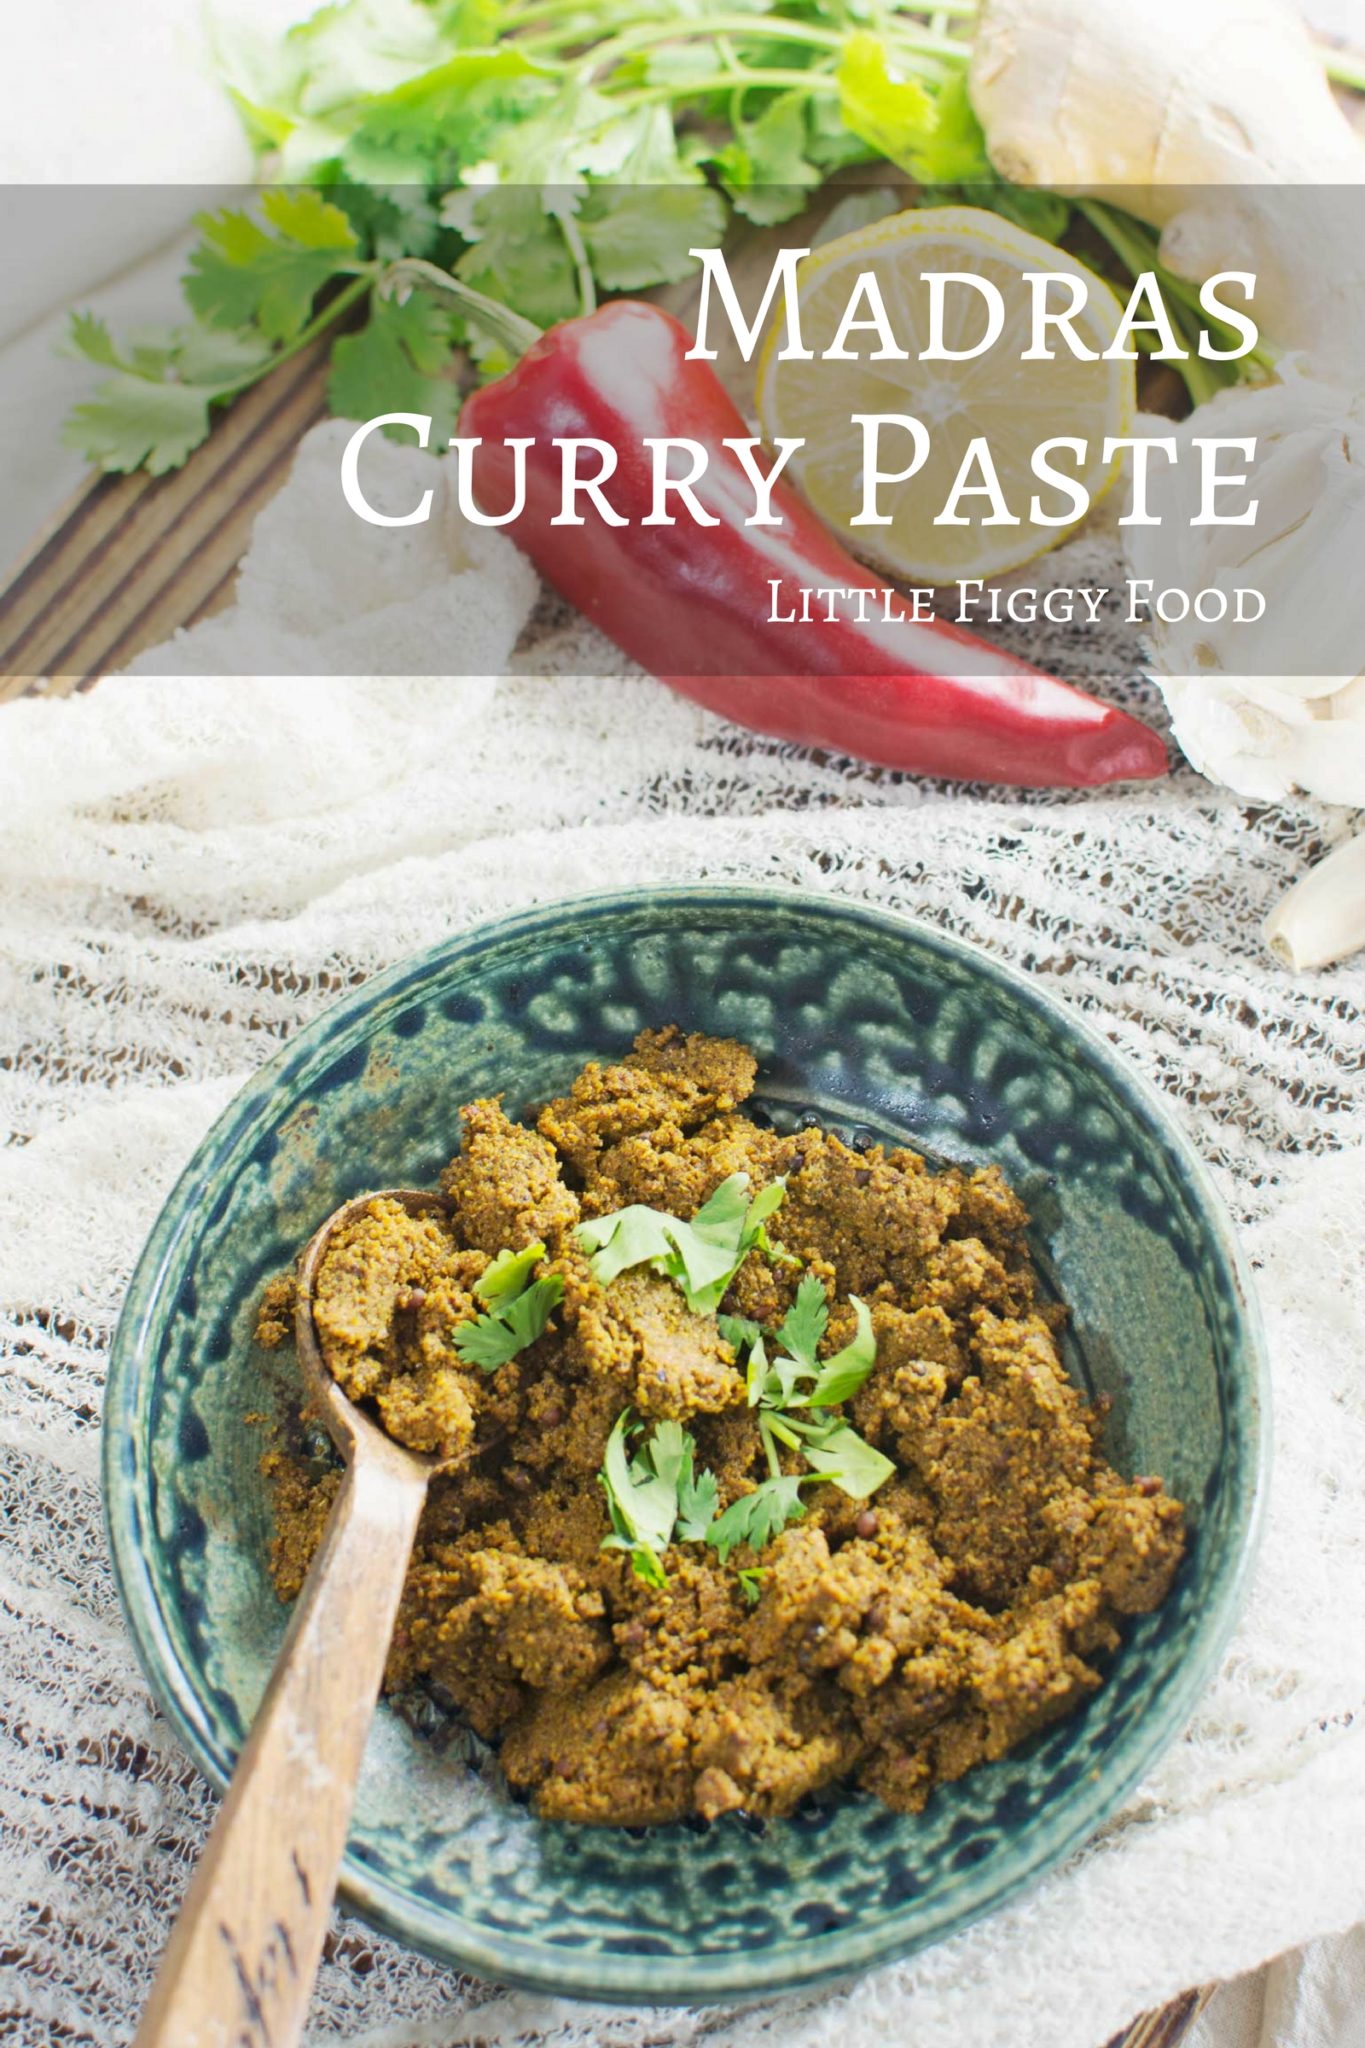 Use this Madras Curry Paste to pimp up your next meal! Recipe @LittleFiggyFood